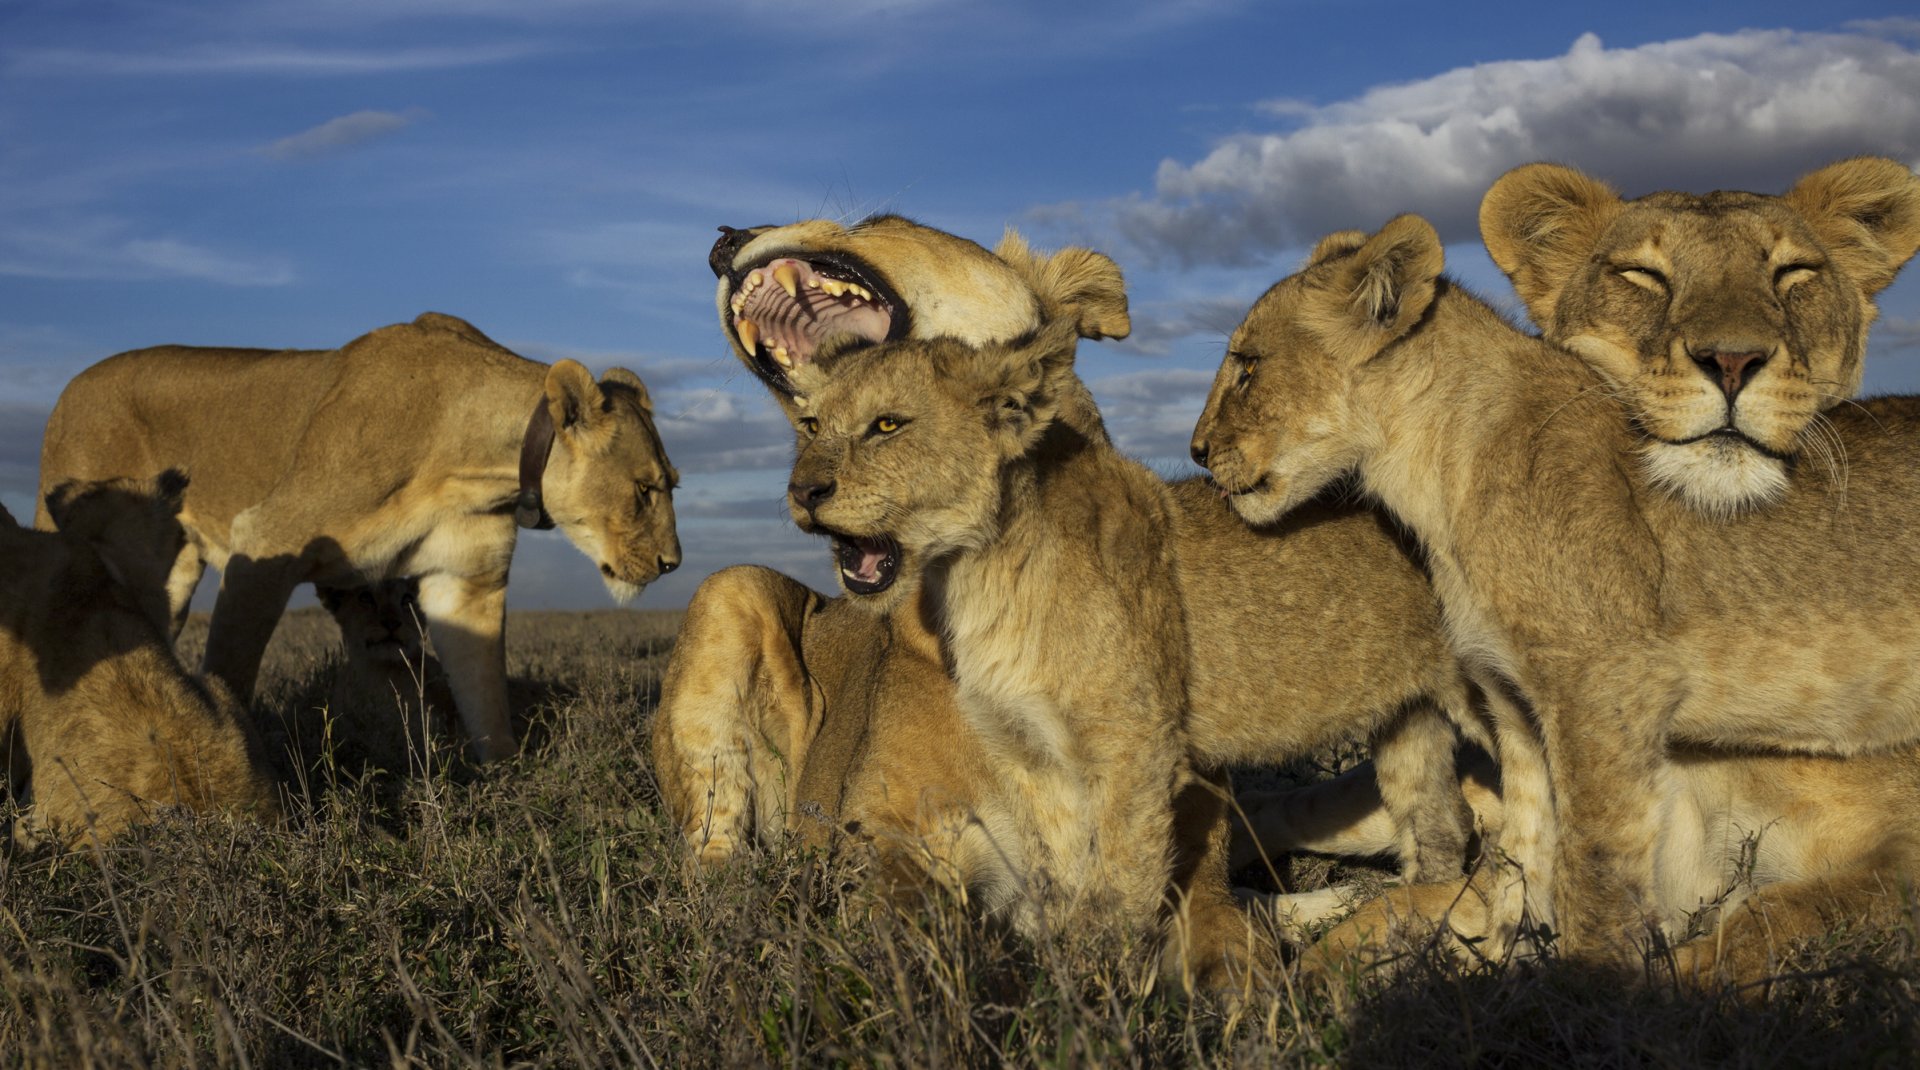 The Lions prides with their cubs in Serengeti